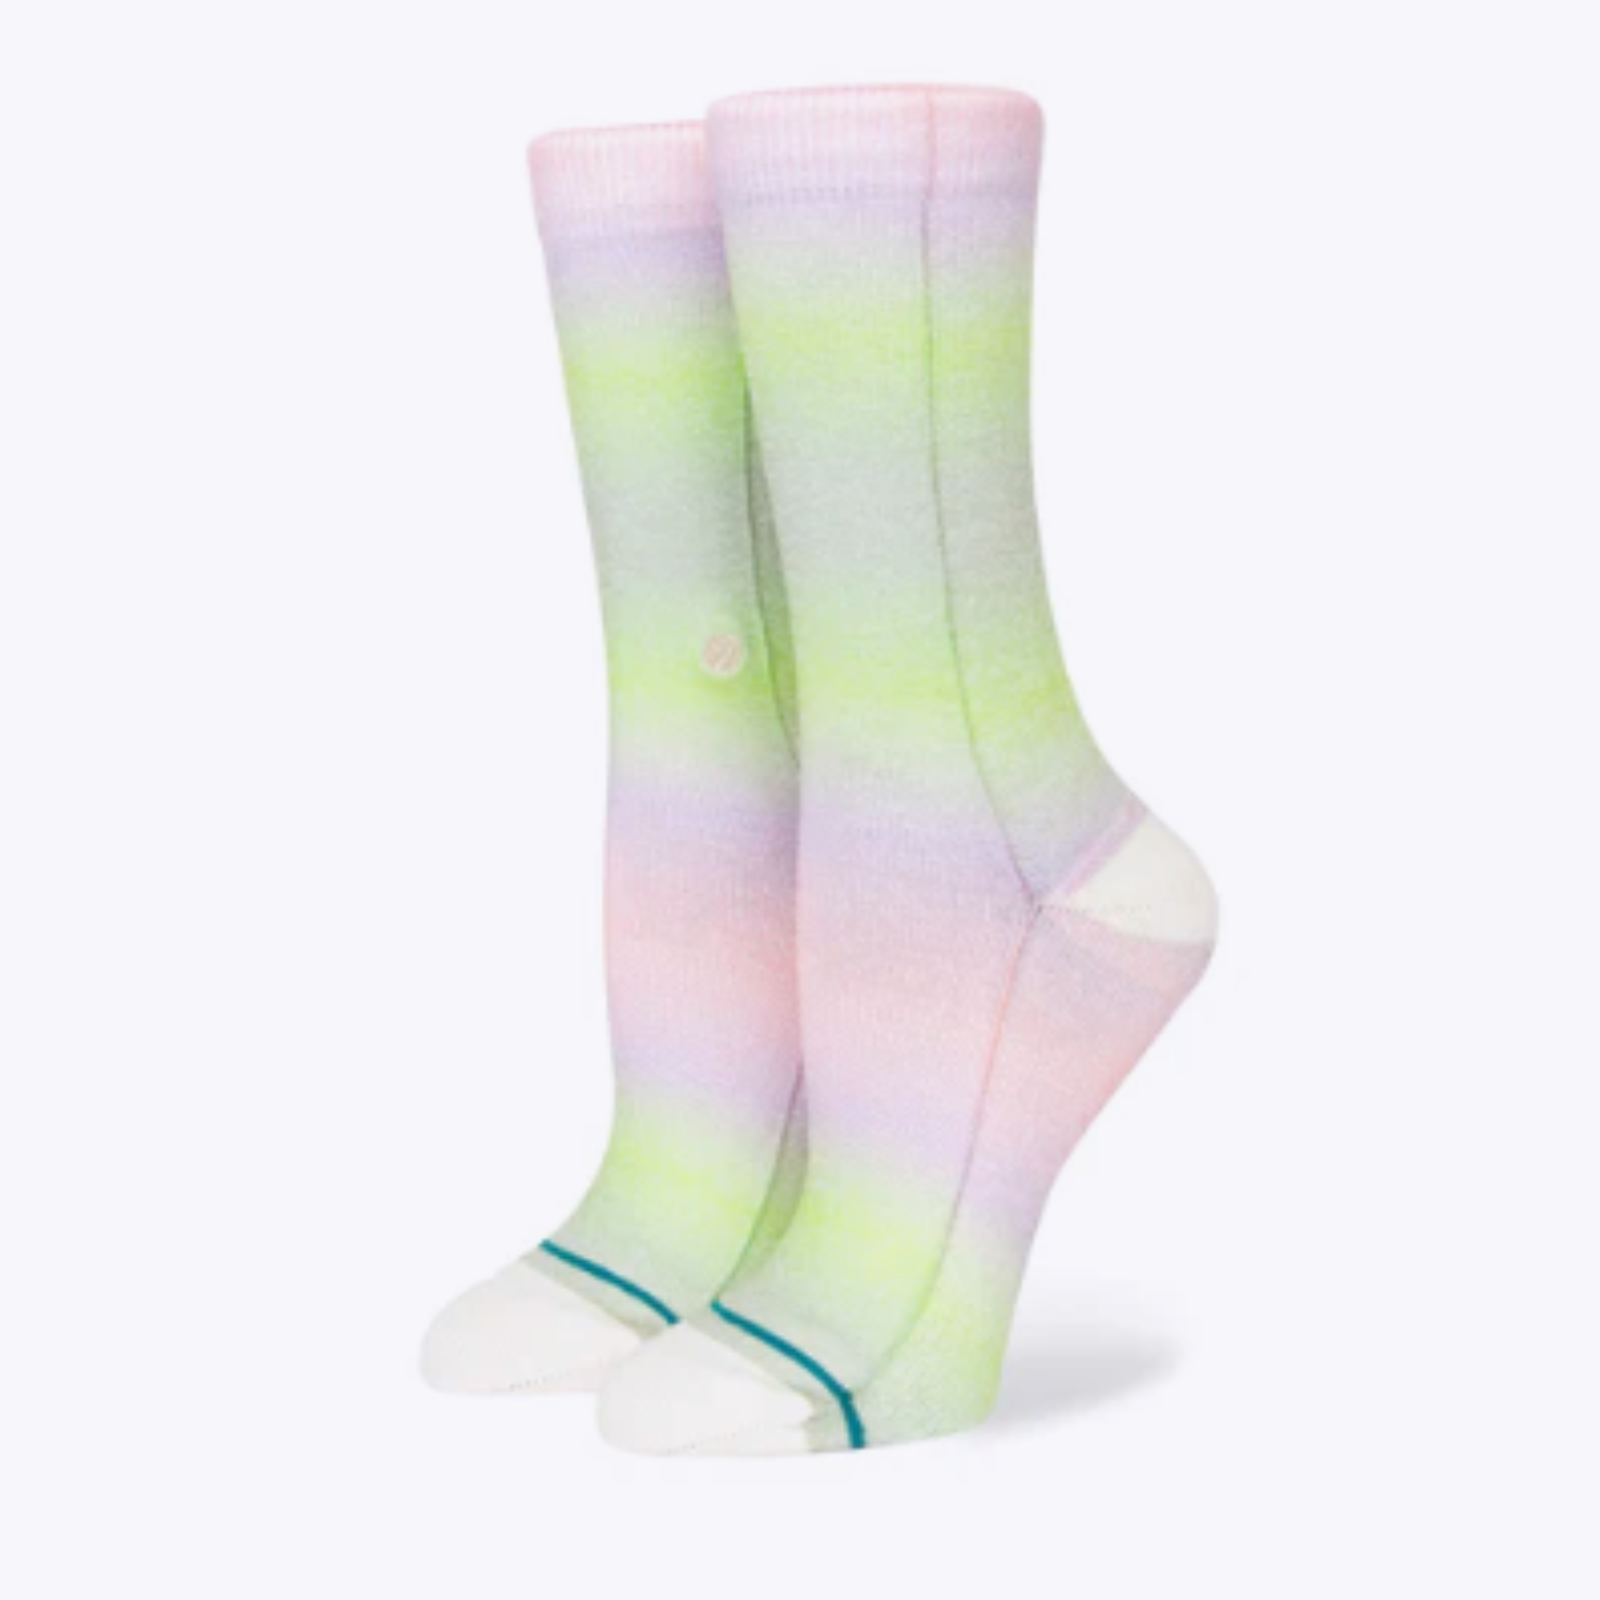 Stance Good Days women's crew sock featuring green, pink, and purple ombre all over sock. Socks shown on display feet. 